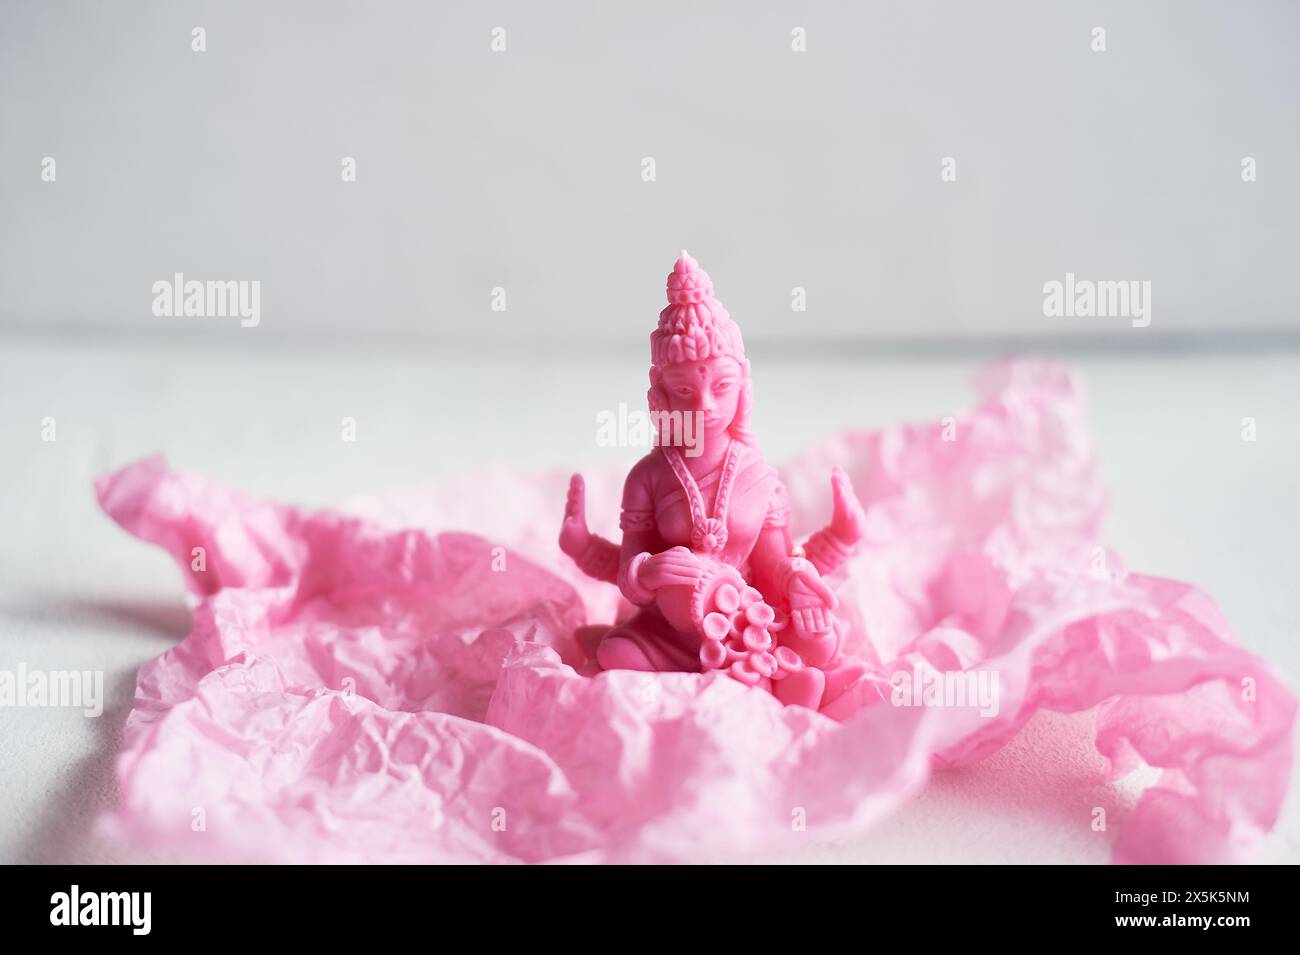 A pink candle is placed on a pink petal, resembling a delicate flower. The magenta hue contrasts beautifully with the natural material, creating a stu Stock Photo